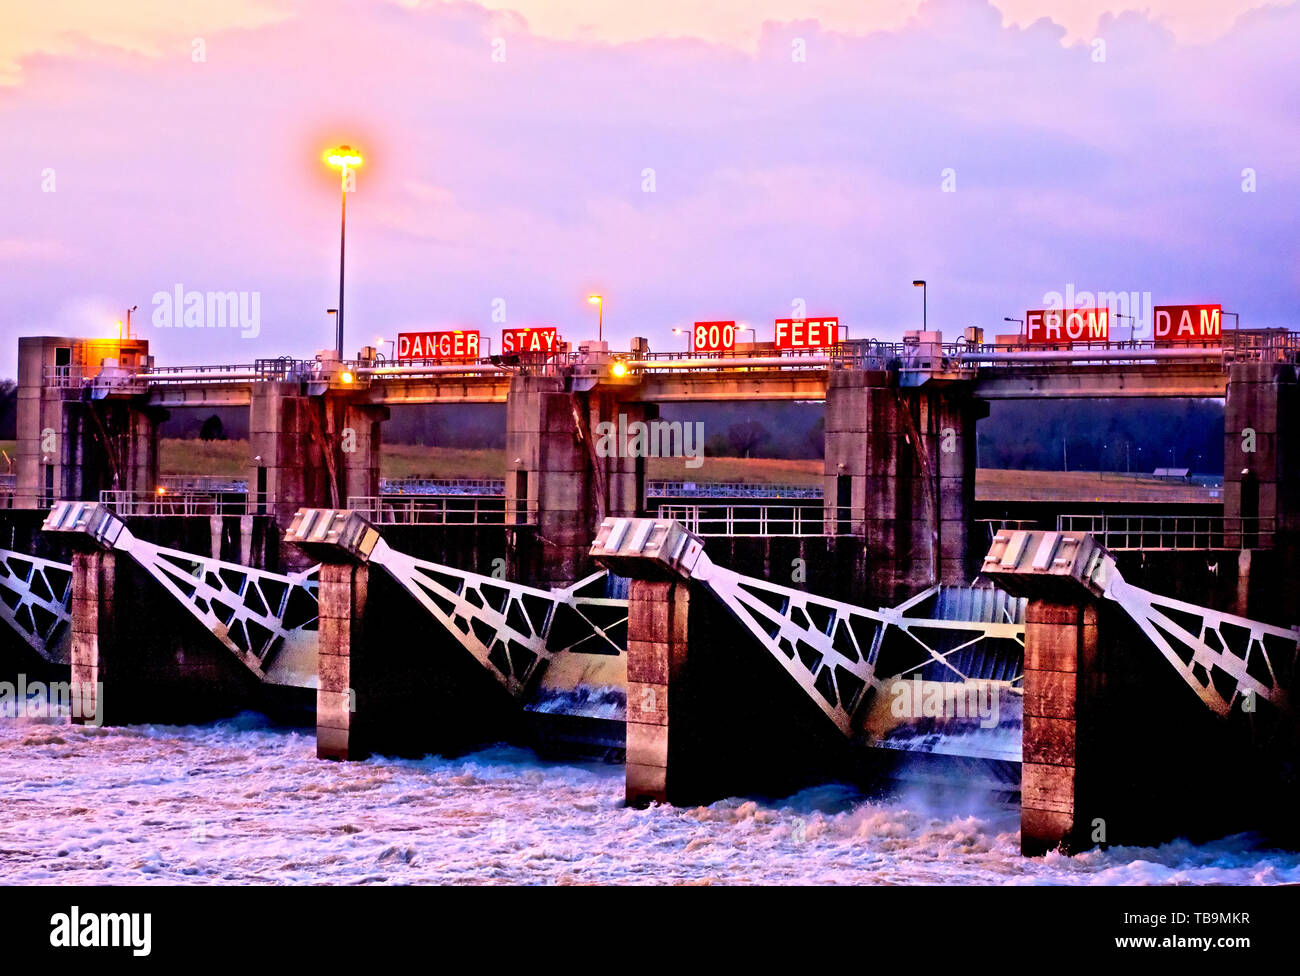 The John C. Stennis Lock and Dam, formerly named Columbus Lock and Dam, is pictured with its gates open at dusk in Columbus, Mississippi. Stock Photo